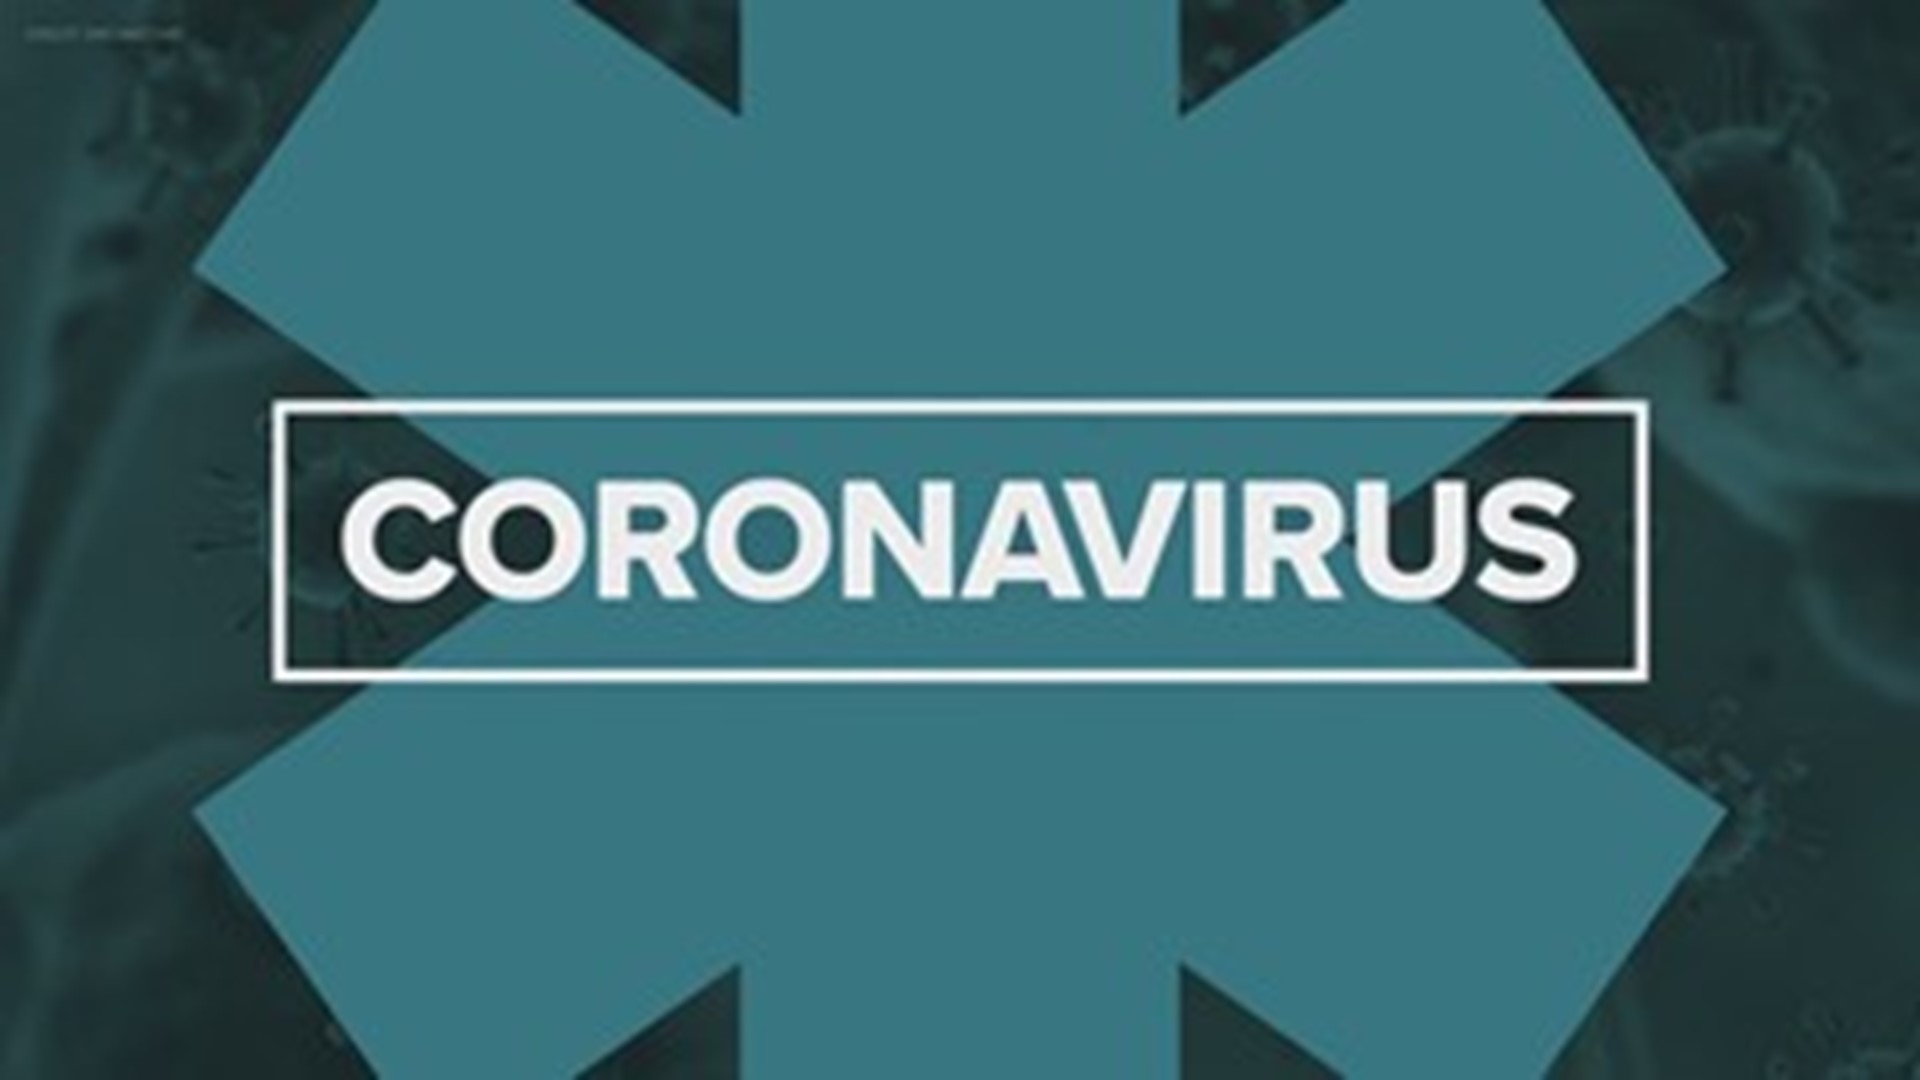 Indiana coronavirus updates: Indiana numbers, More federal supply before expanding vaccine appointments, 3 dead after getting vaccine — 1/22/2021 Sunrise update